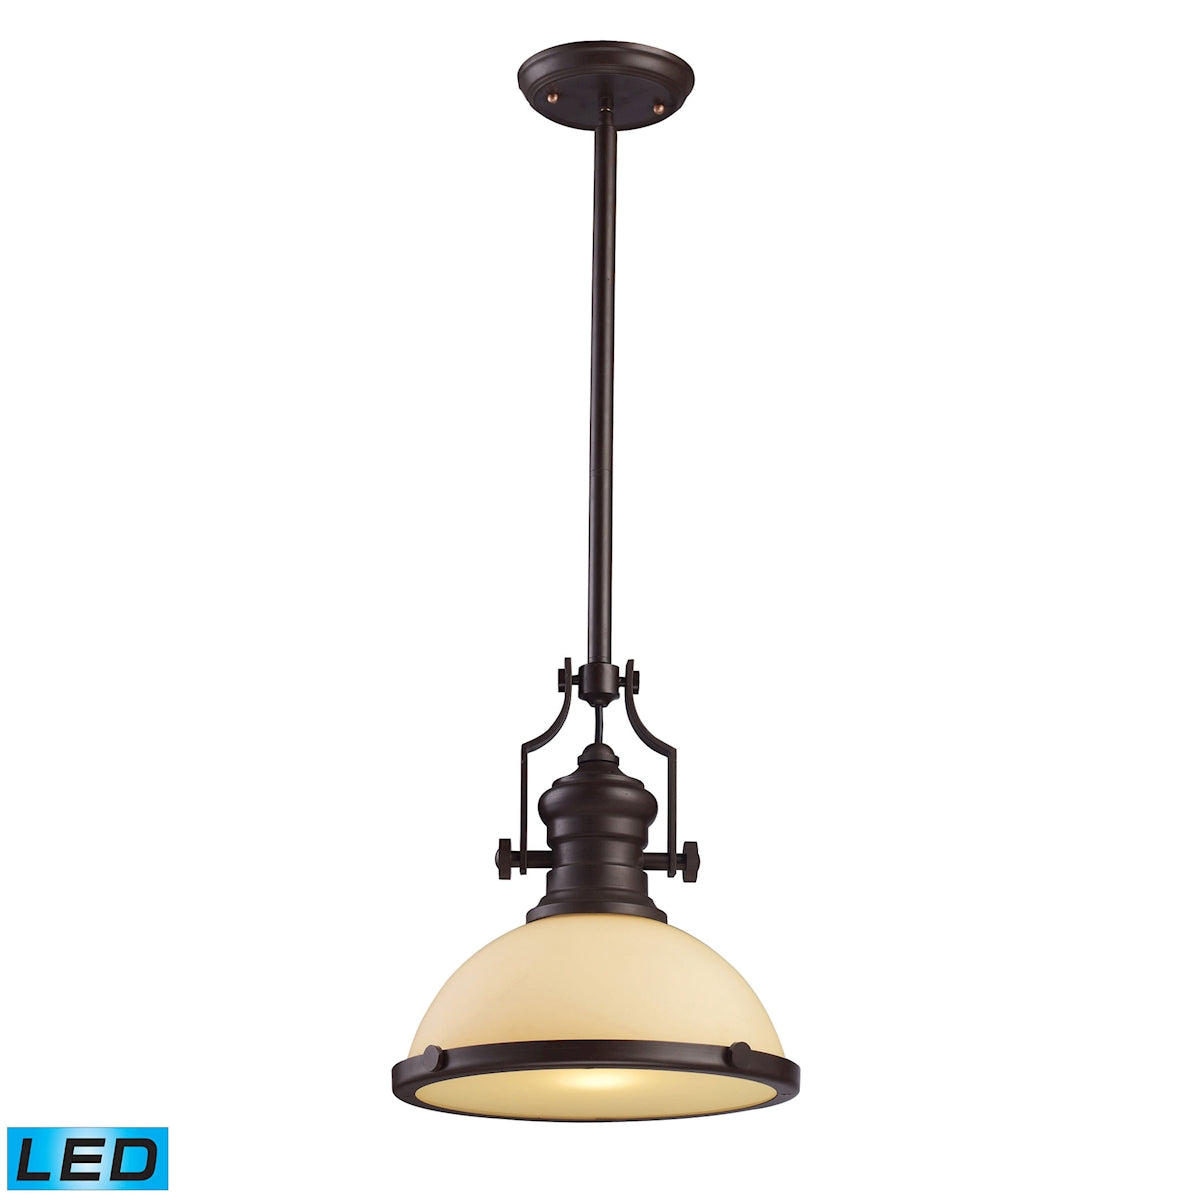 ELK Lighting 66133-1-LED Chadwick 1-Light Pendant in Oiled Bronze with Off-white Glass - Includes LED Bulb